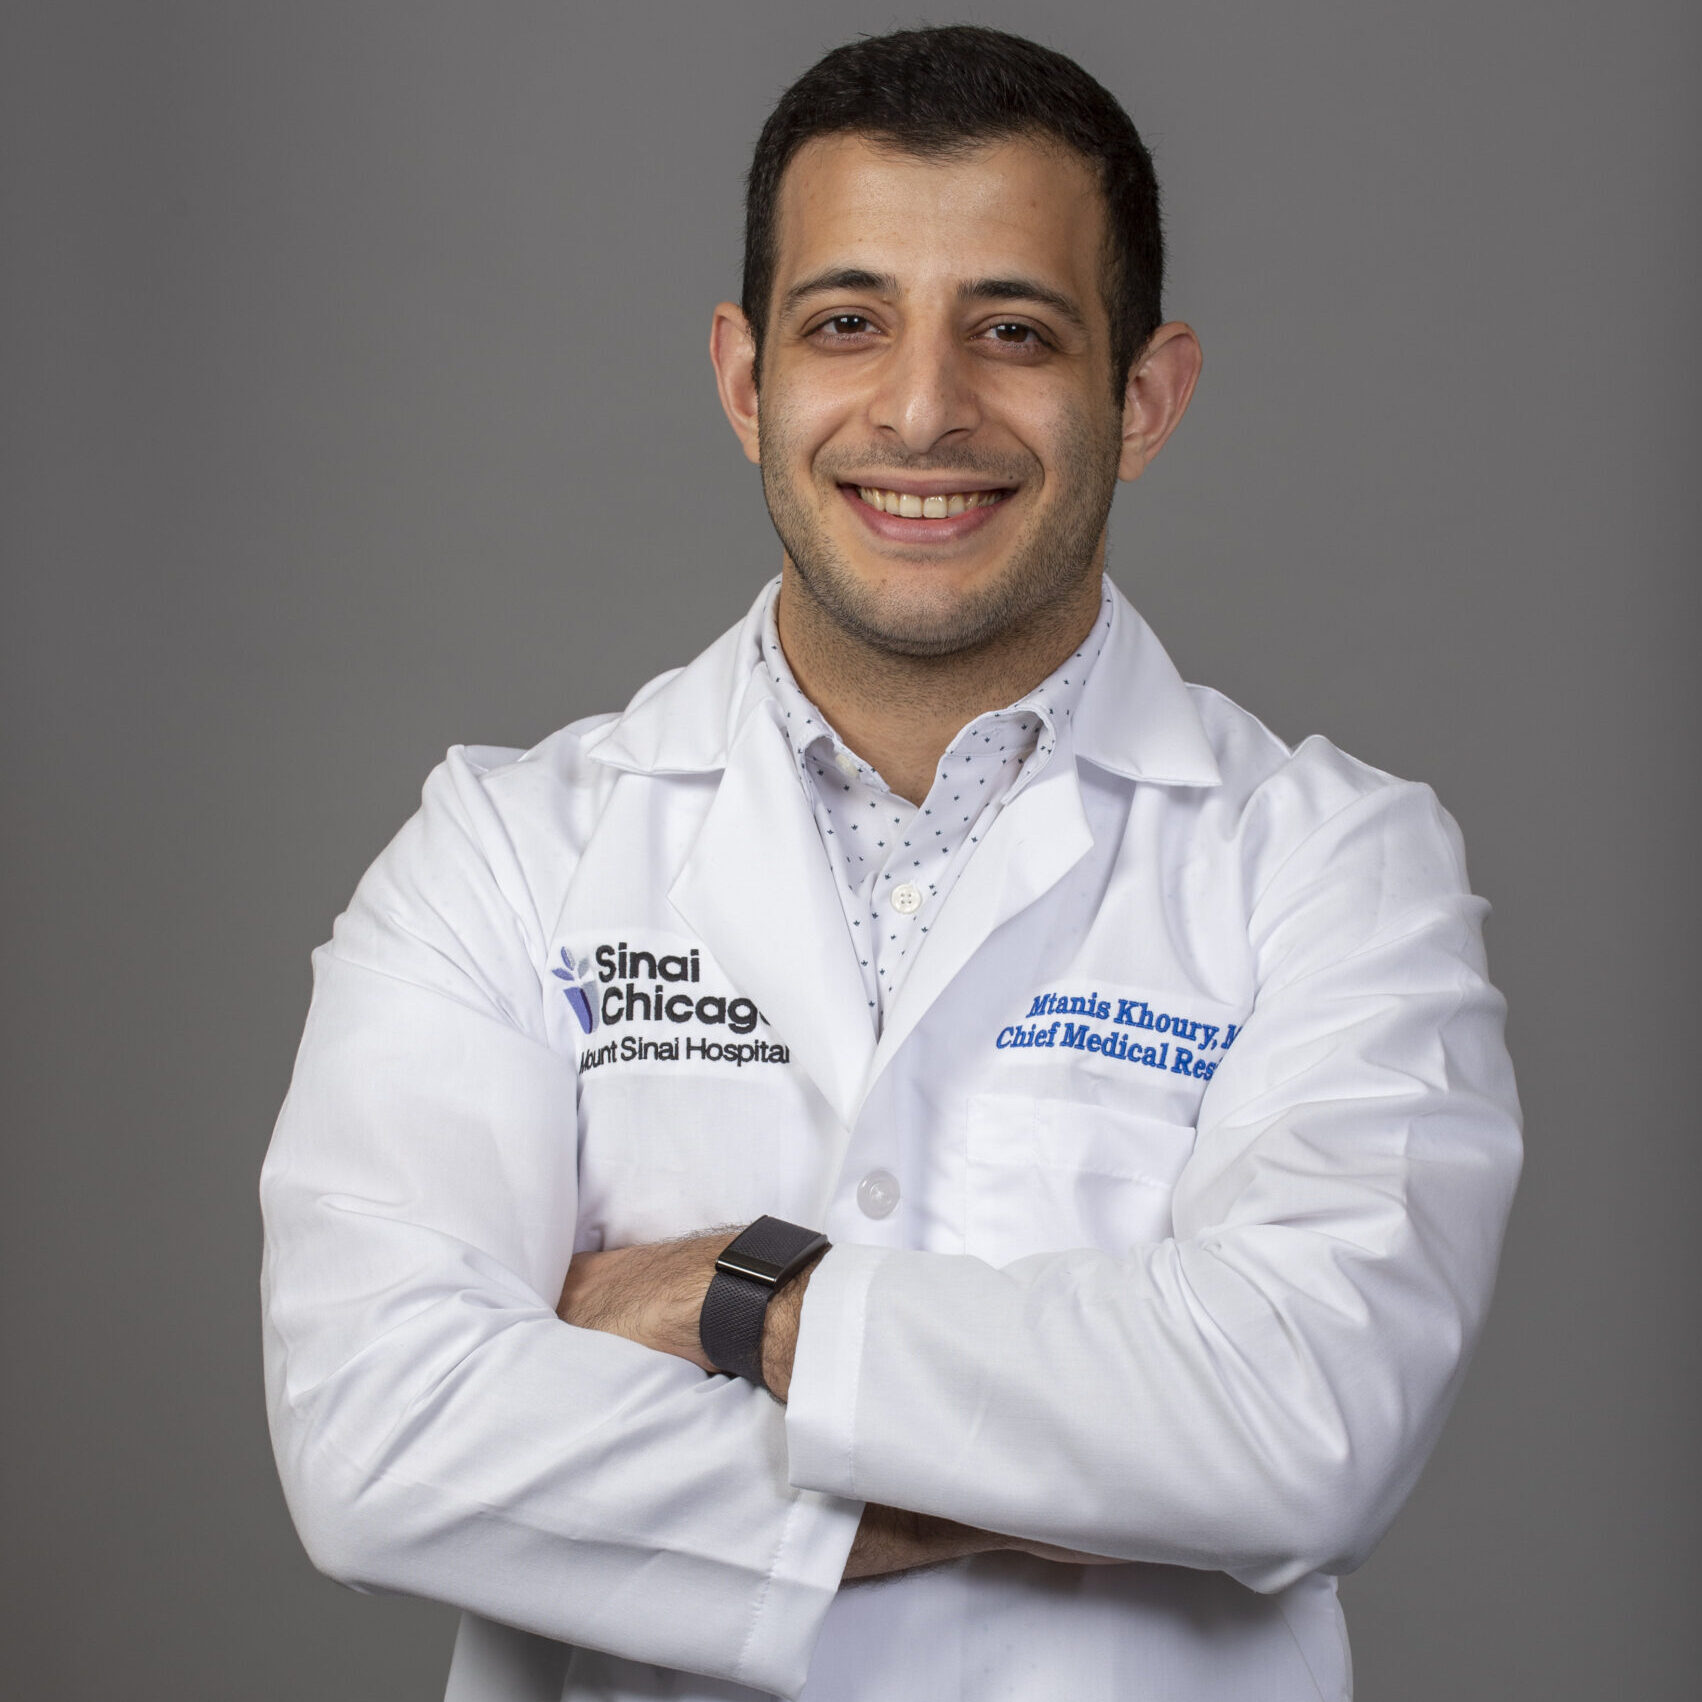 Mtanis Khoury, MD, Chief Medical Resident, Internal Medicine, Sinai Chicago, August 17, 2022